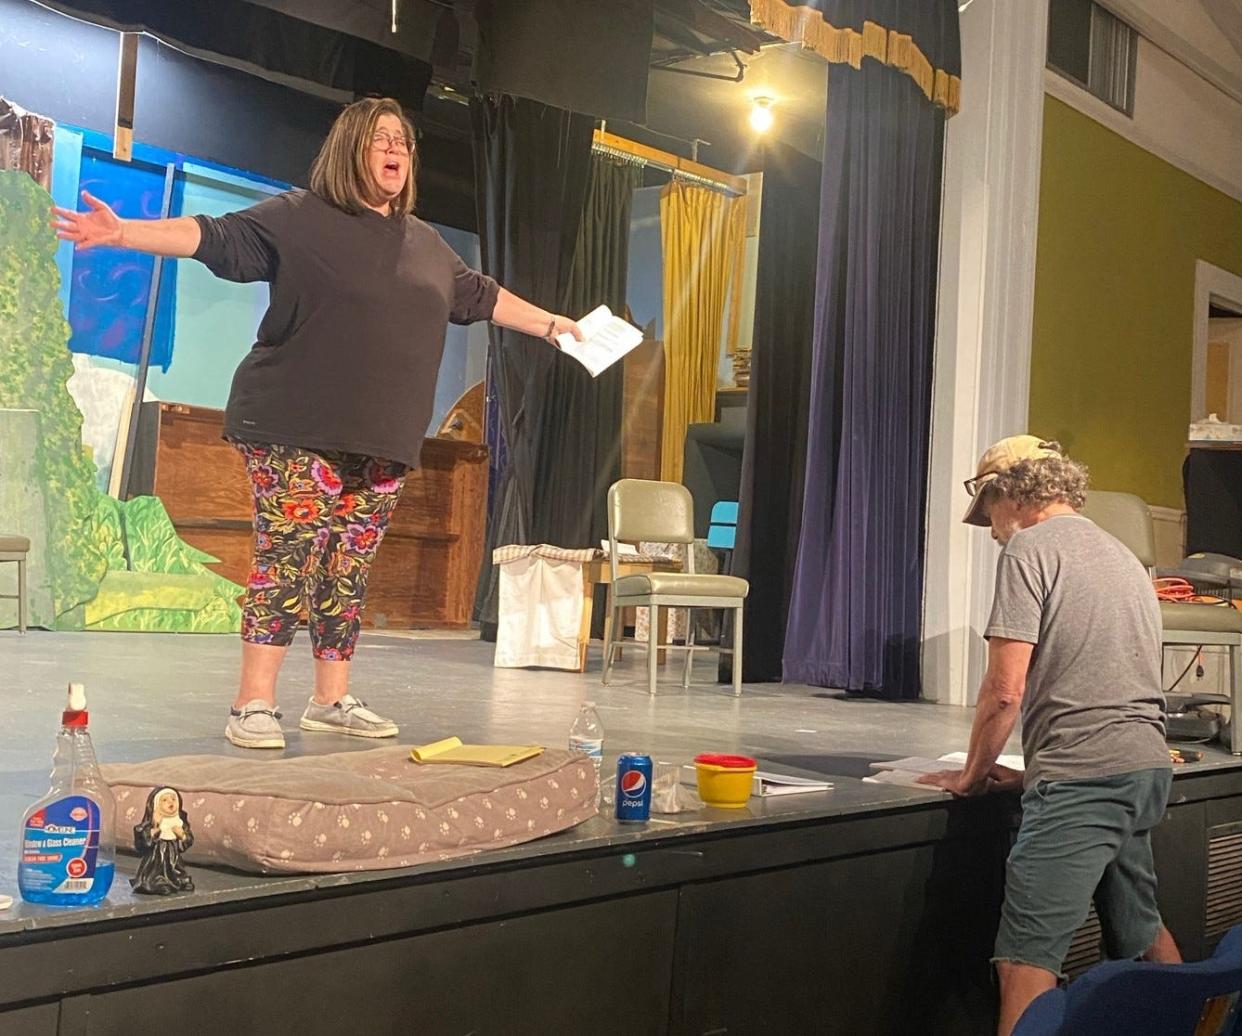 Leslie O. Stavely and director Brad Smith rehearse lines in preparation for Stavely's role as Sister Mary Amnesia in The Schoolhouse Players' production of Nunsense earlier this year.